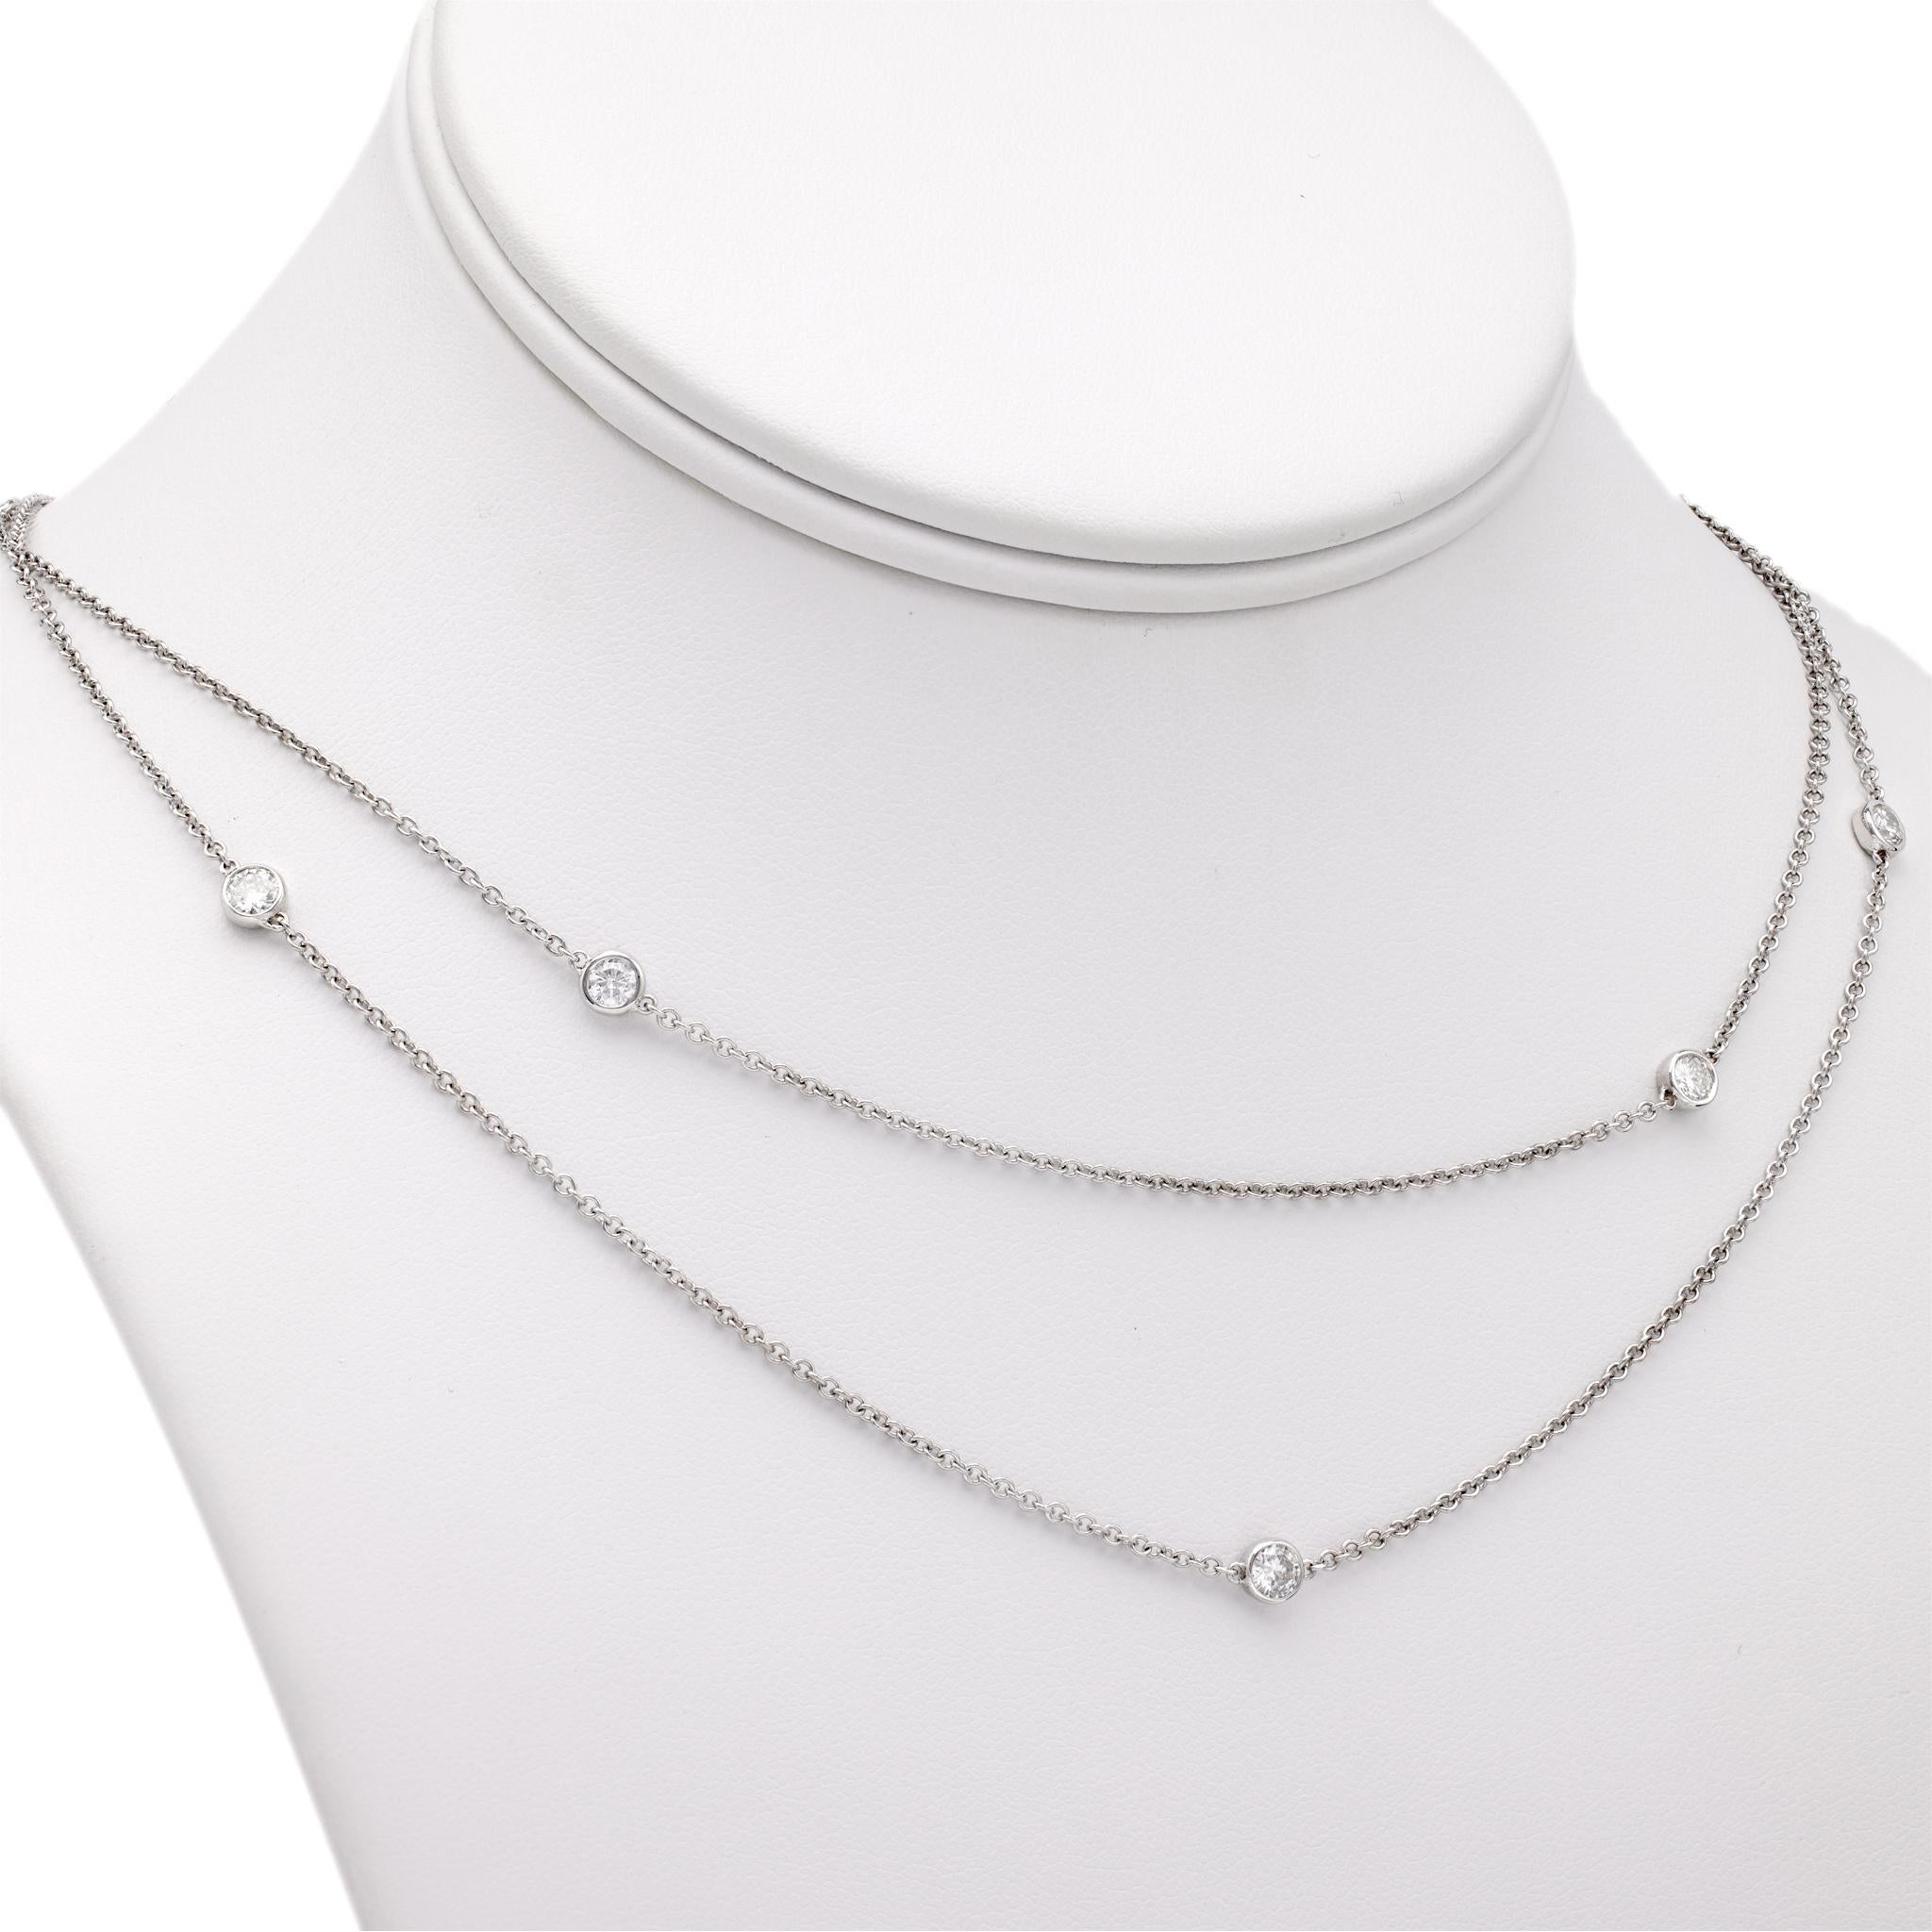 Women's or Men's Italian 18k White Gold Diamond by the Yard Chain Necklace